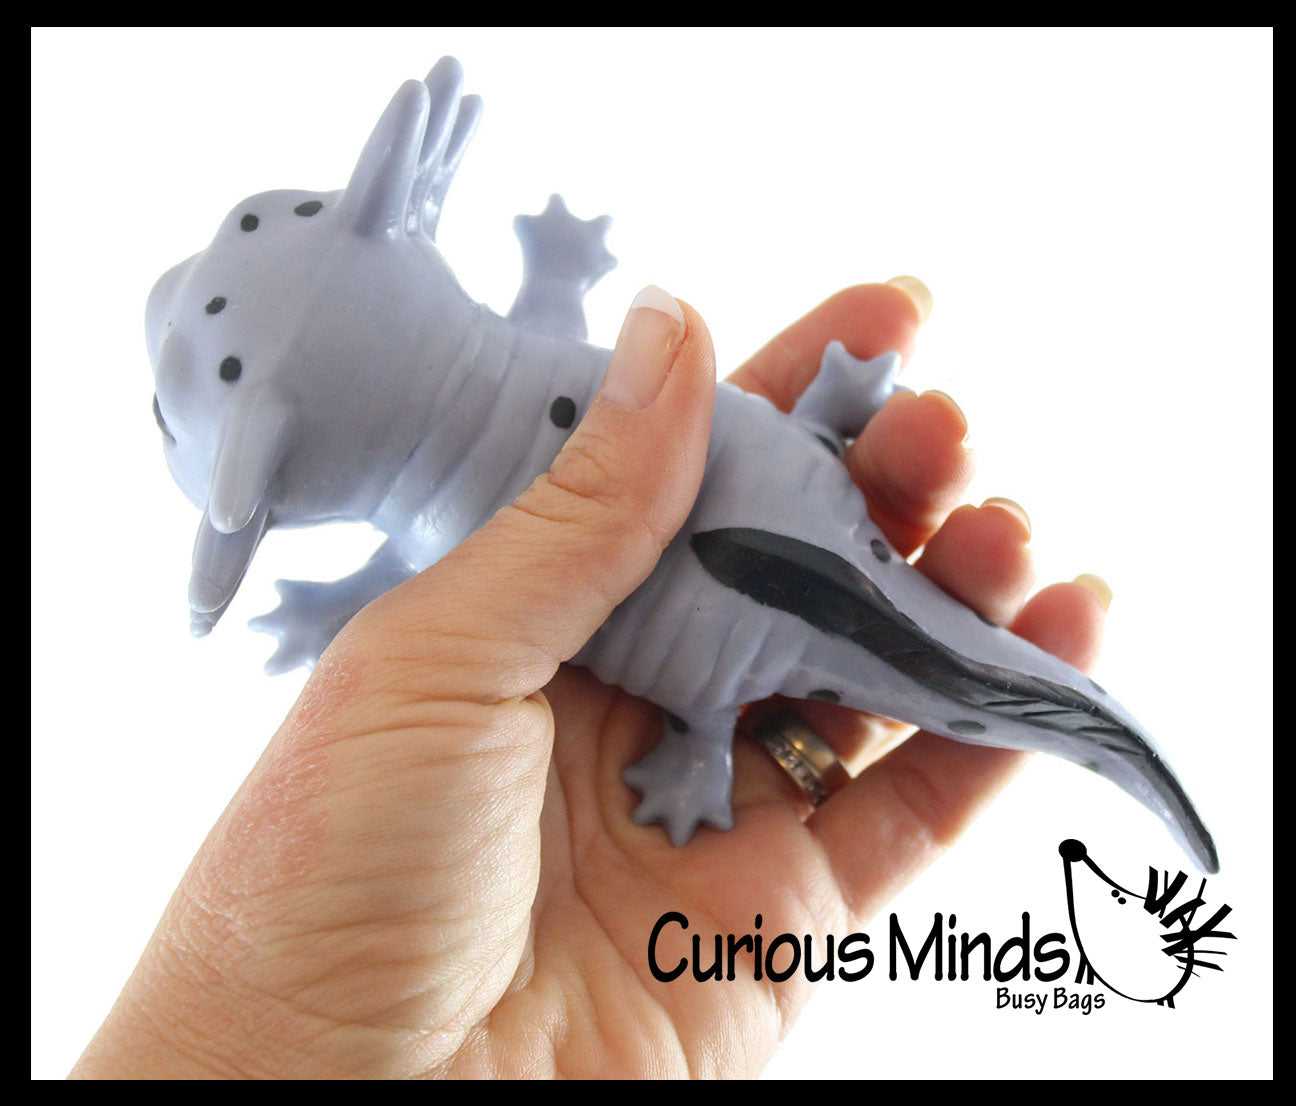 Tiny Axolotl and Putty - Squishy Cute Sea Creatures Stretchy and Squee